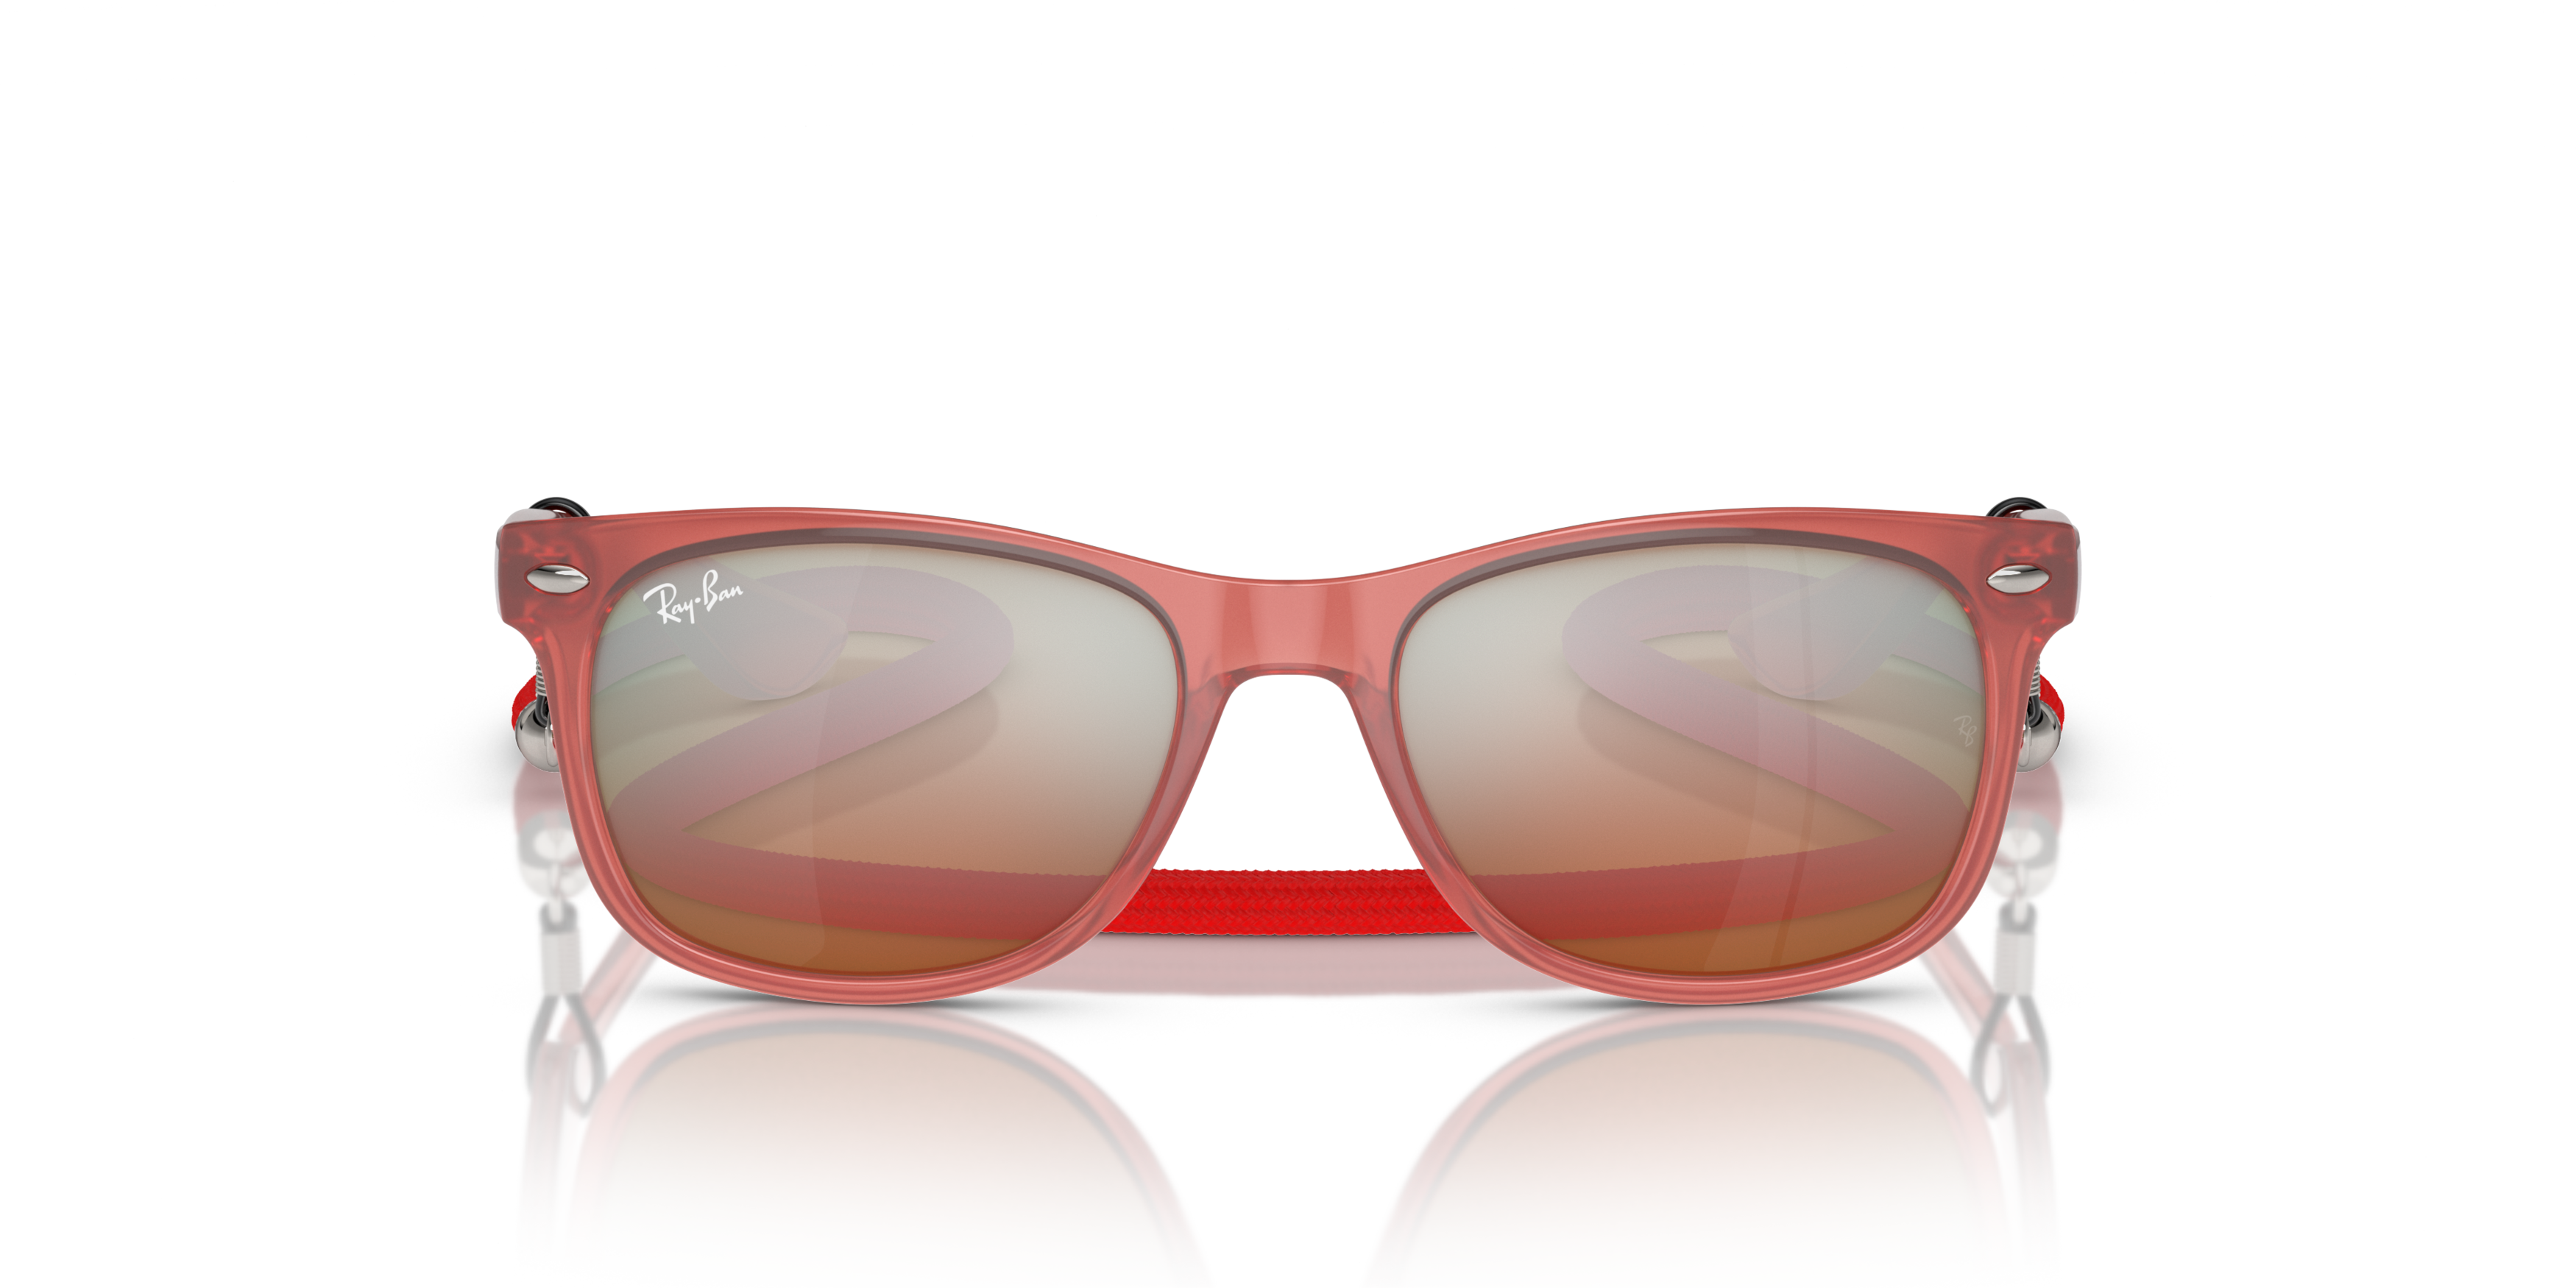 [products.image.front] Ray-Ban Junior New Wayfarer RJ9052S 7145A8